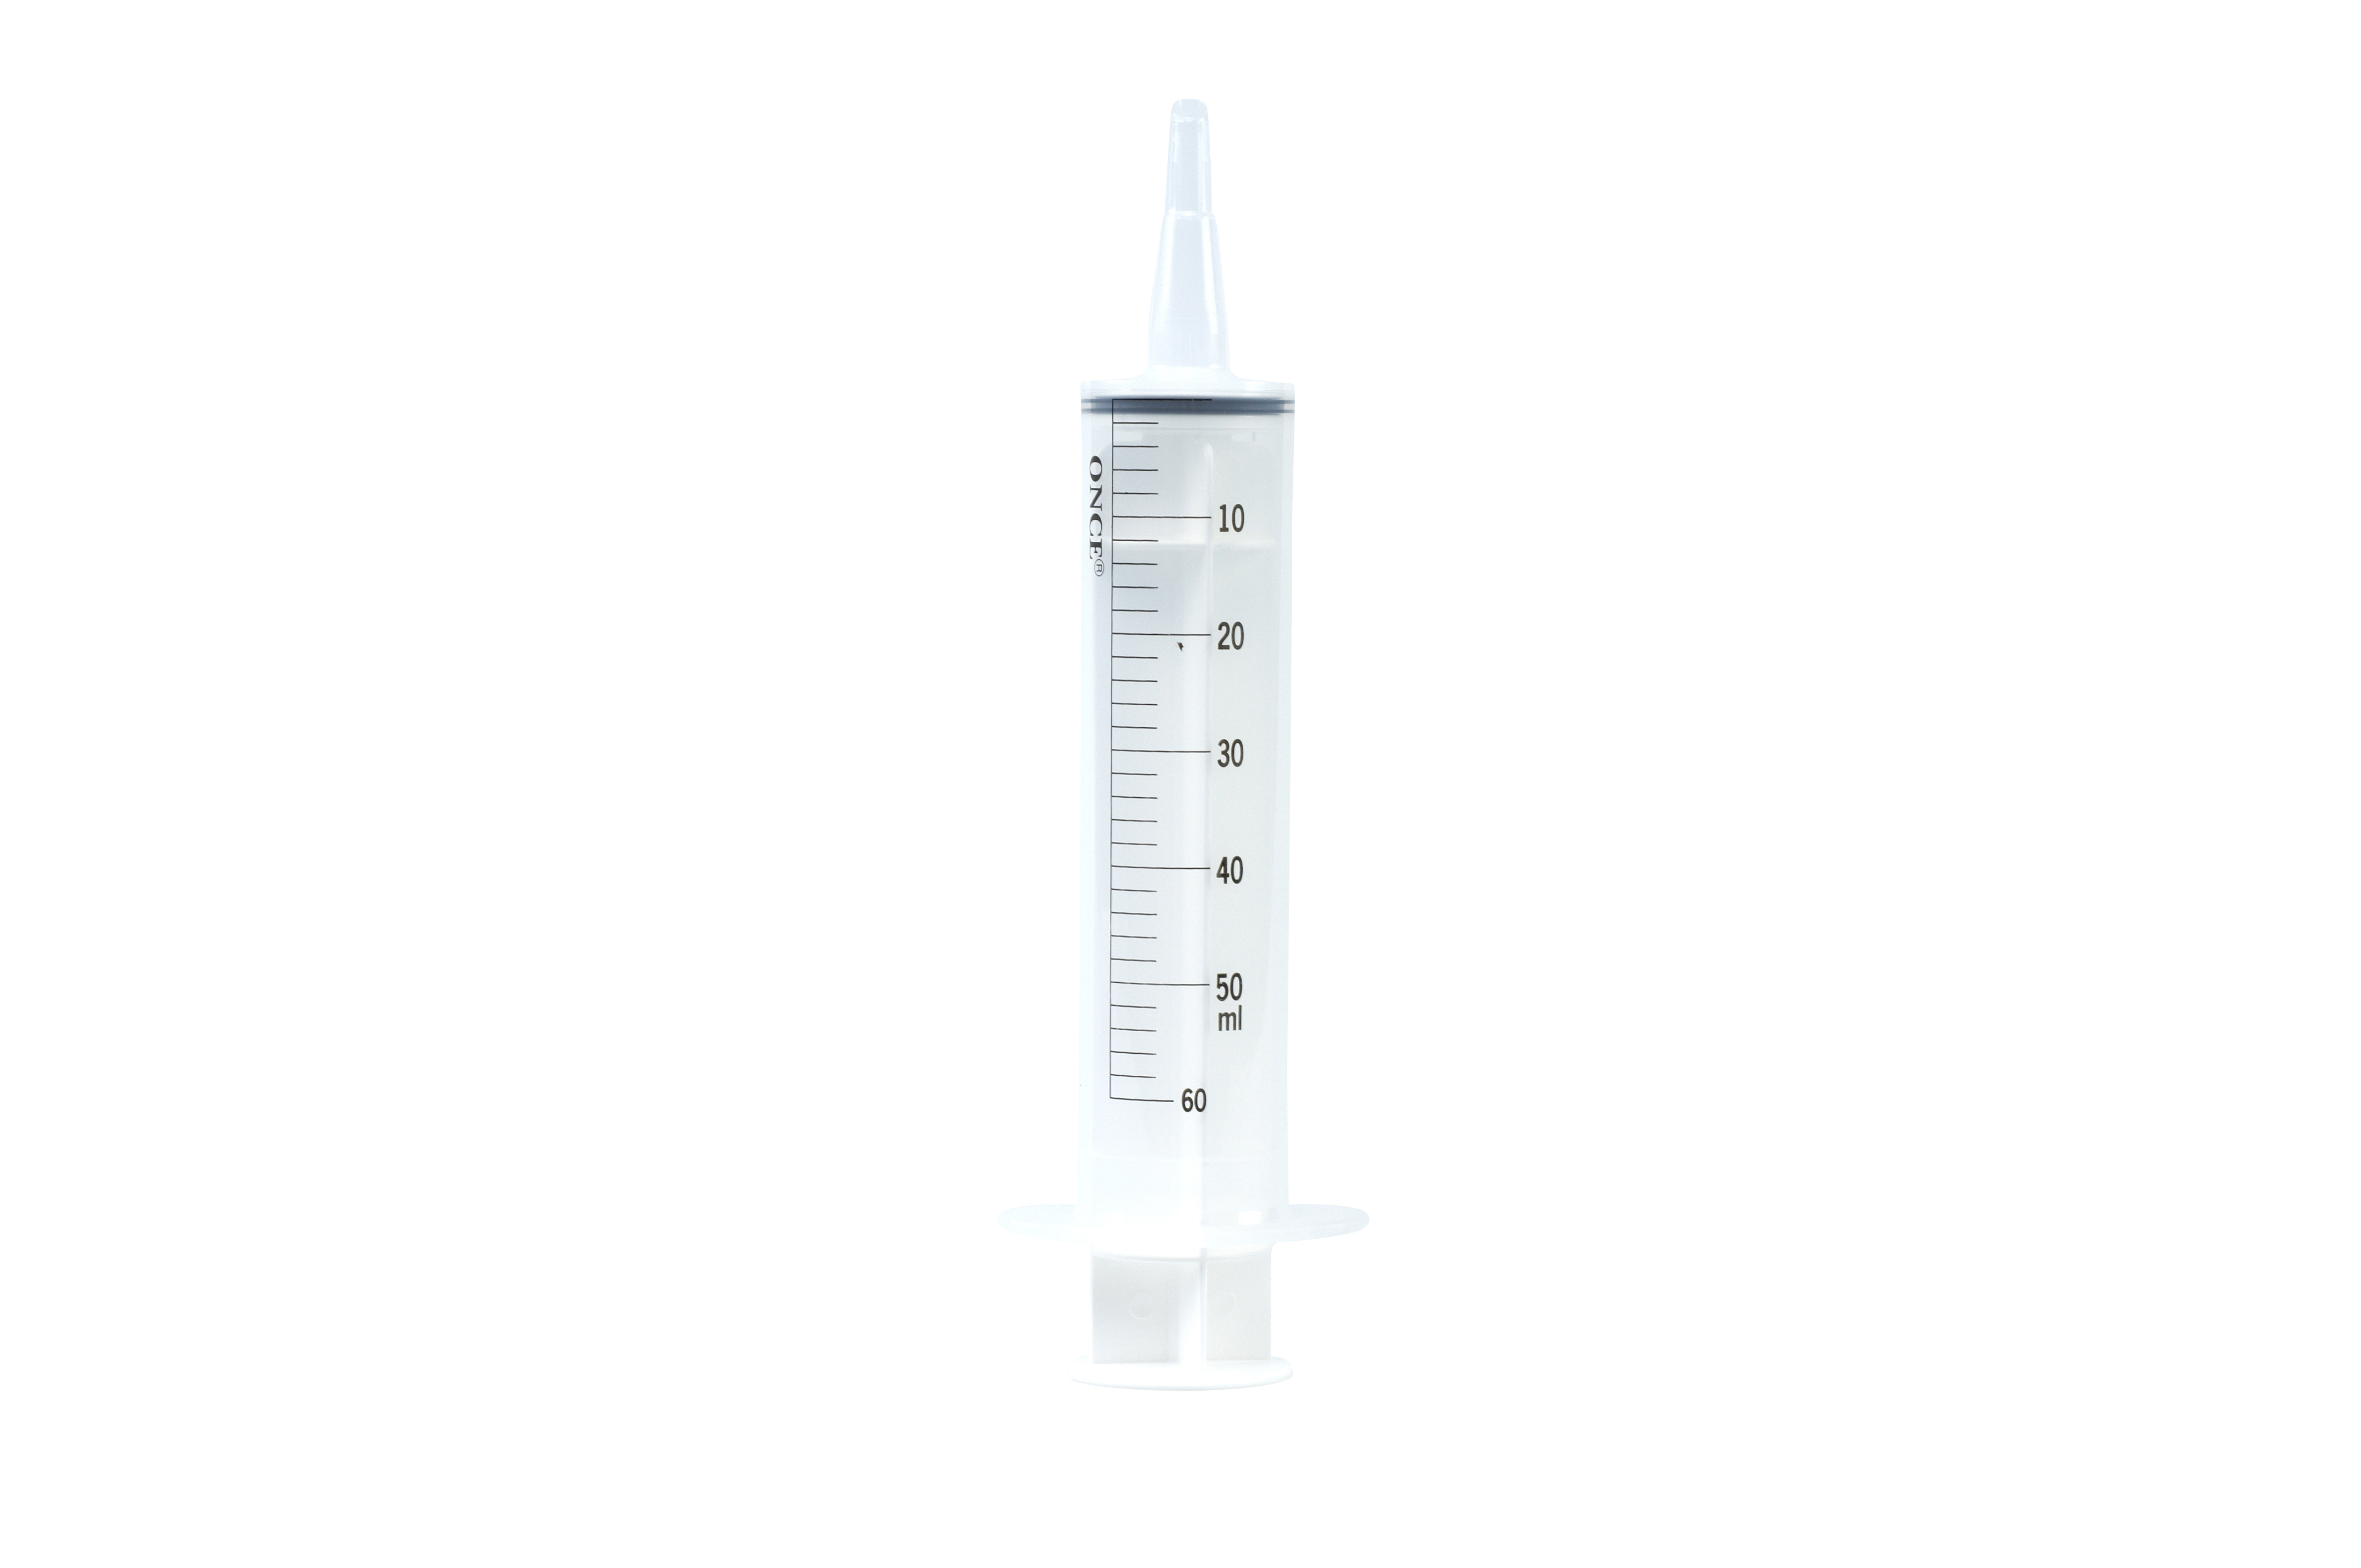 Once disposable syringe 50 ml, with catheter tip, 25/pk